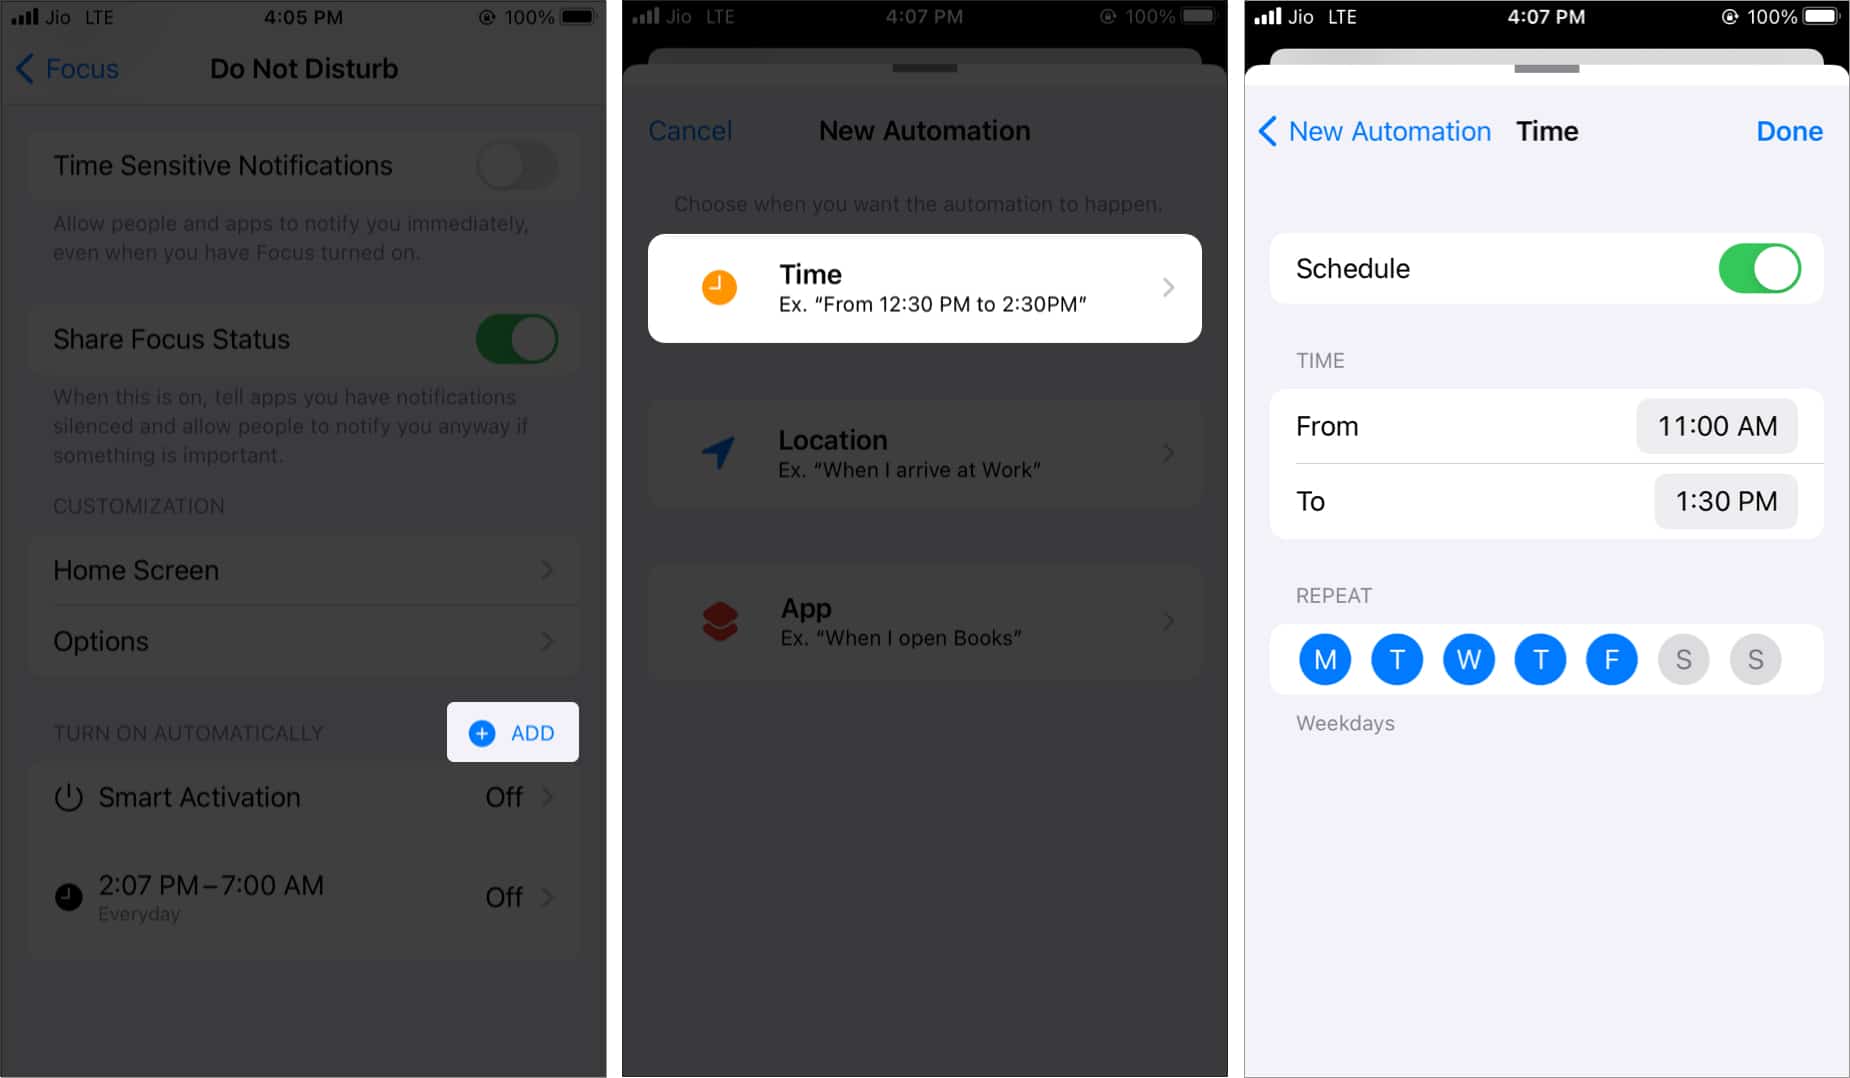 How to schedule Do Not Disturb or have it turn on automatically